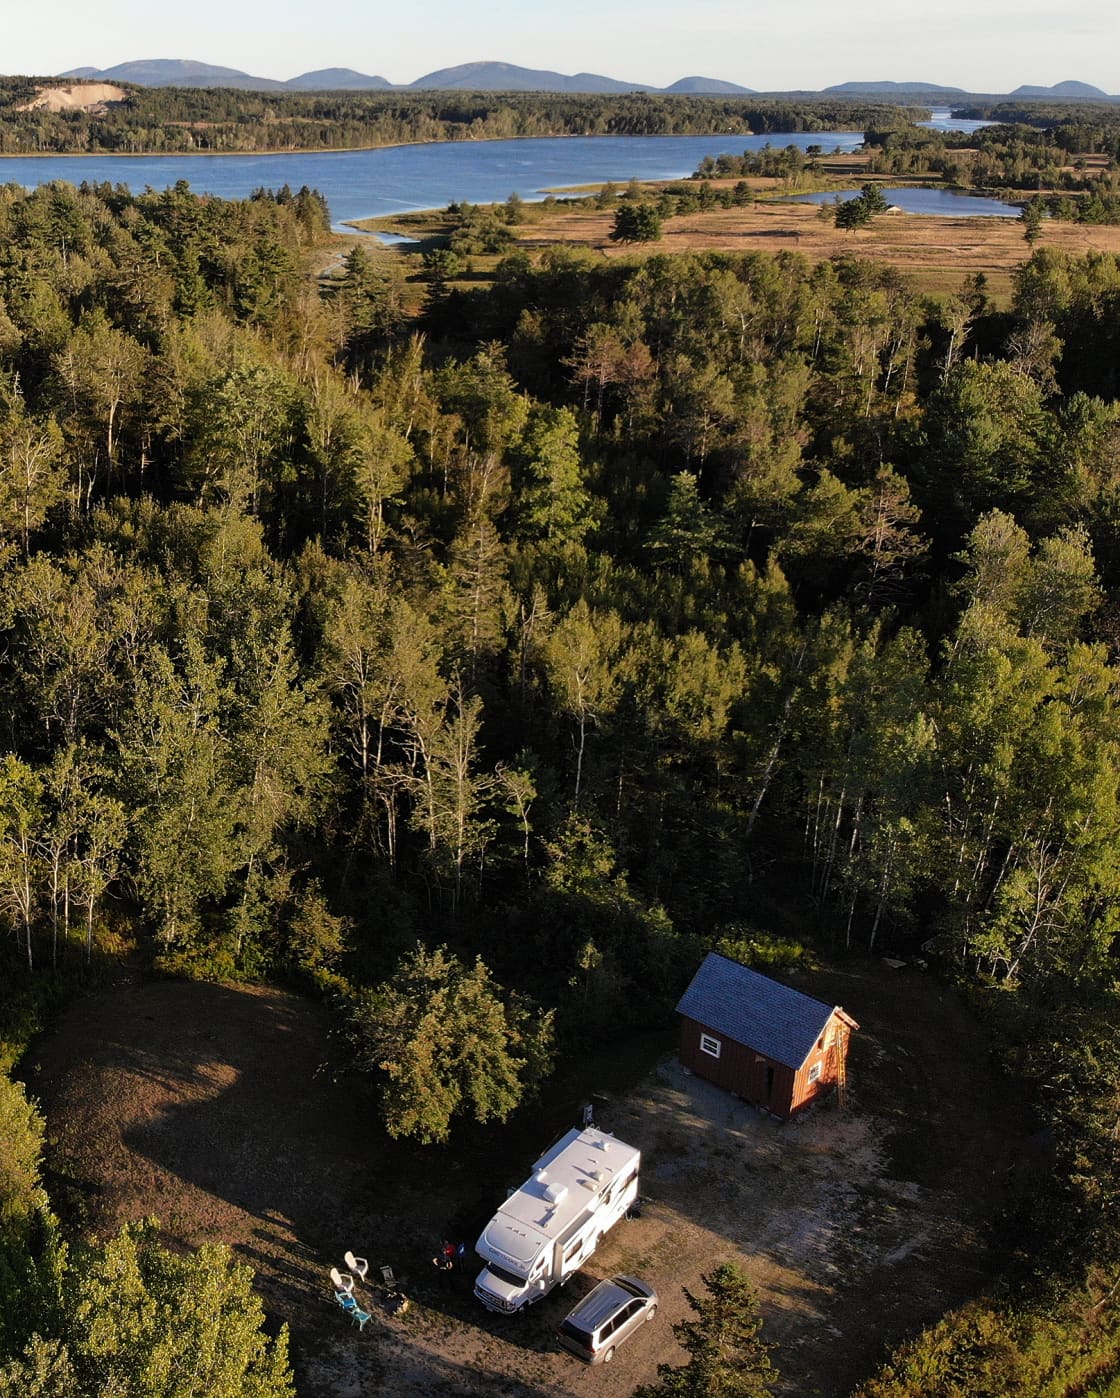 August 28, 2020. Aerial view of Ellie's RV spot including future Airbnb cabin. Image by Daniel Seagull.